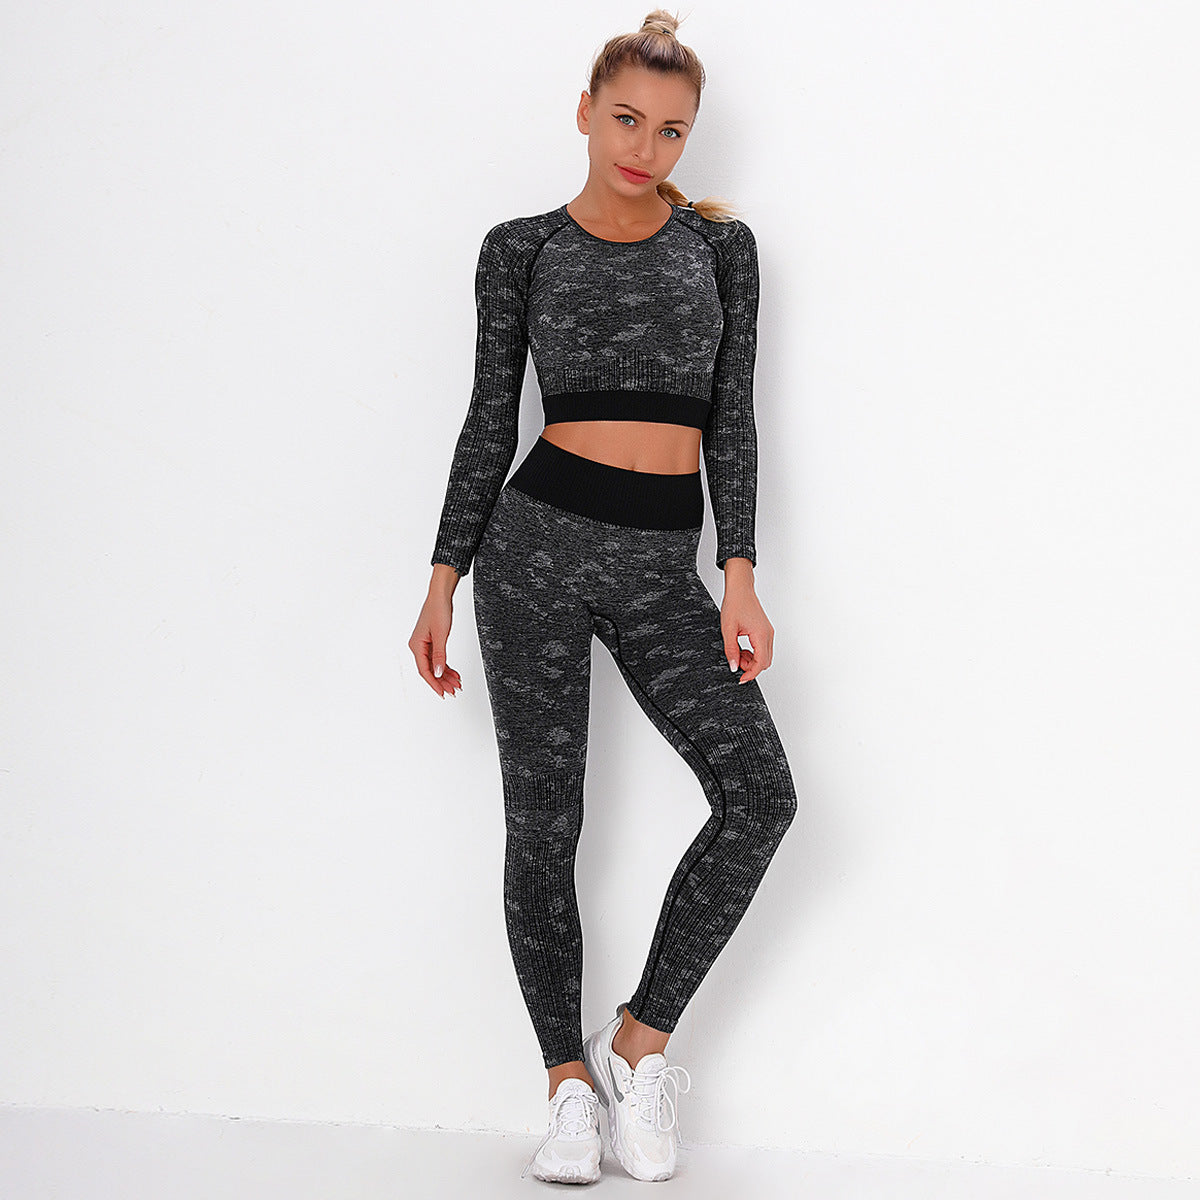 SPORTS SCULPT LUXE LONG SLEEVE SPORTS TOP& LEGGINGS – starbella-clothing